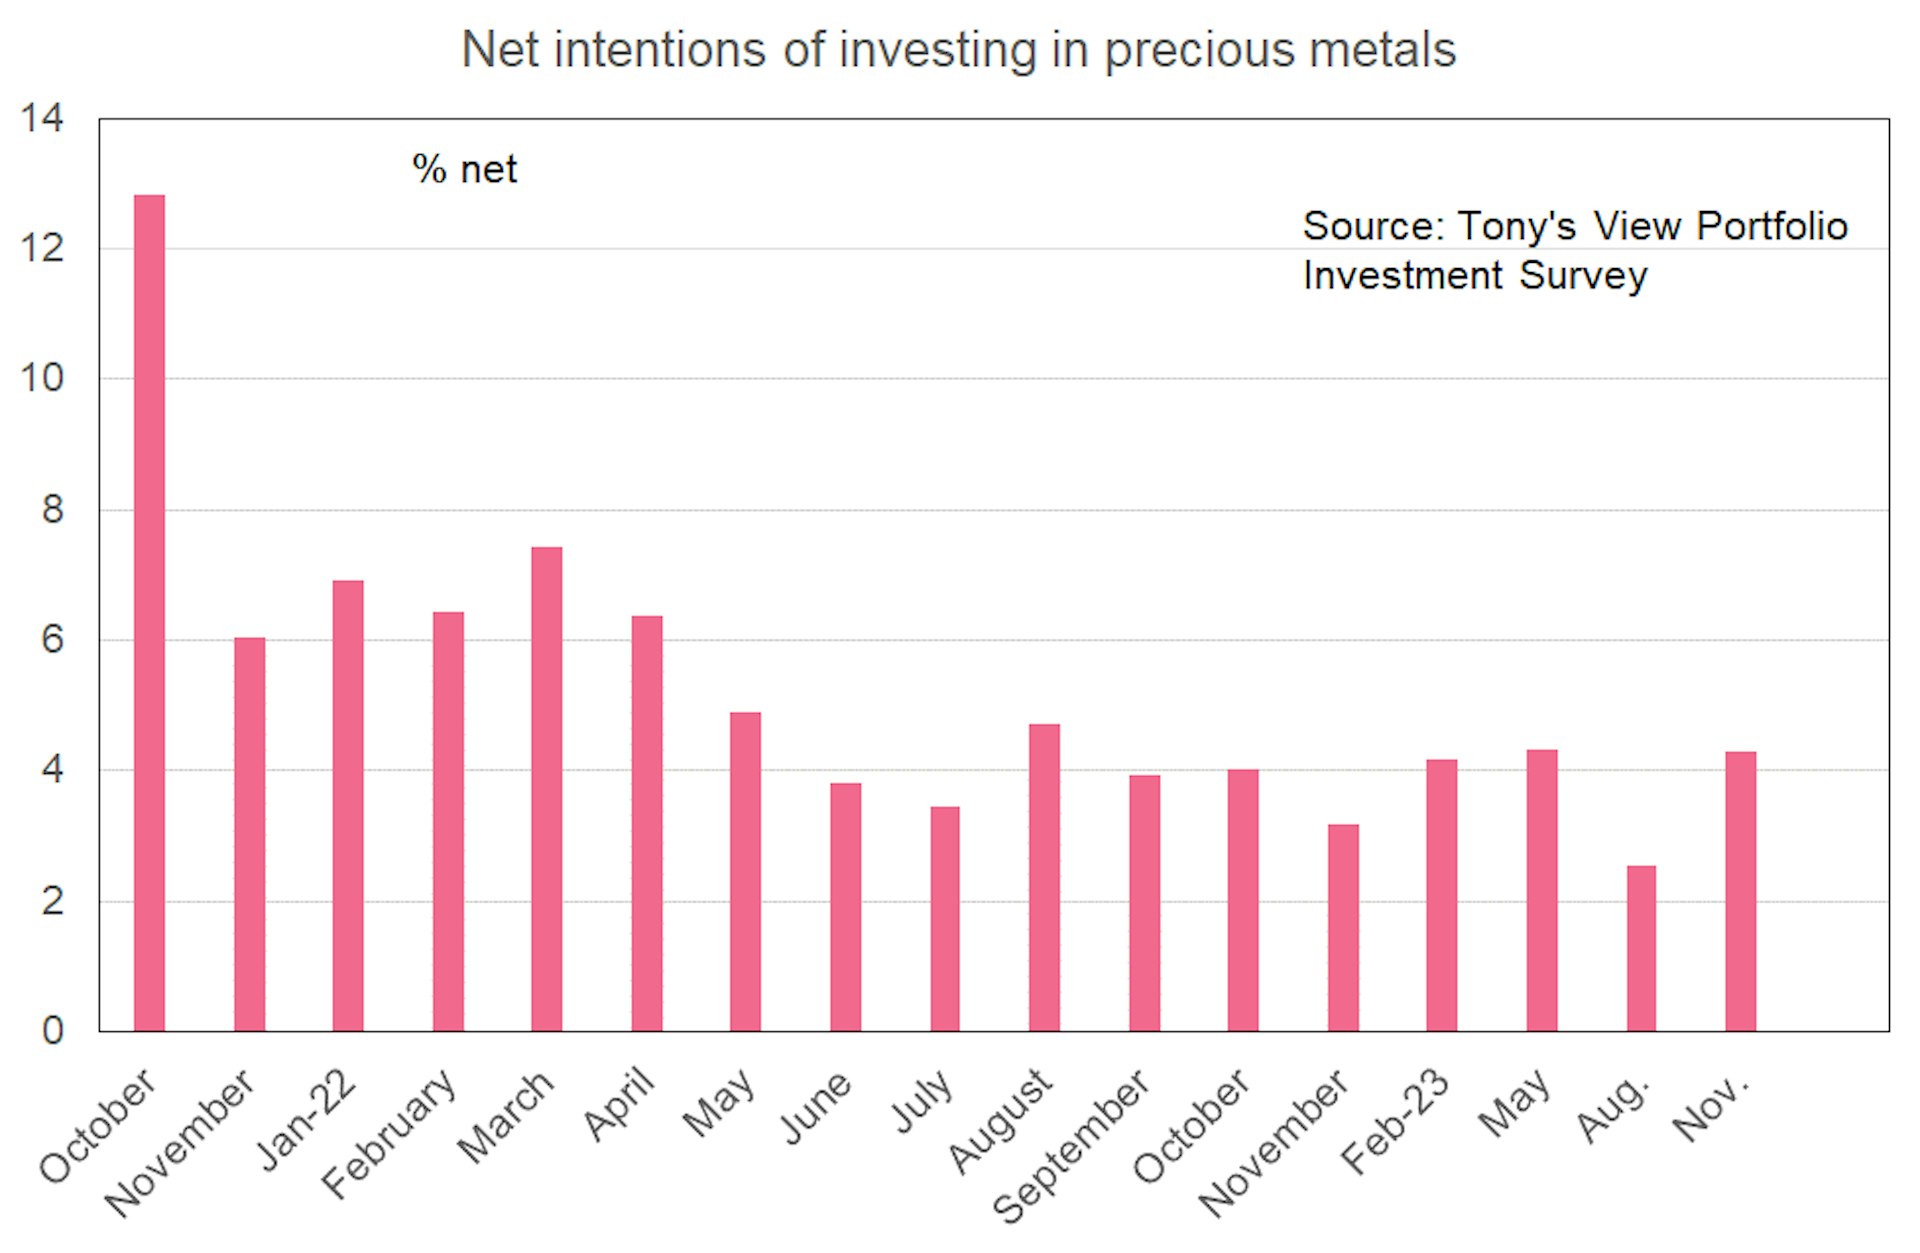 A bar graph illustrates survey respondents' intentions to invest in precious metals. From August to November, intentions have risen about 2%. 